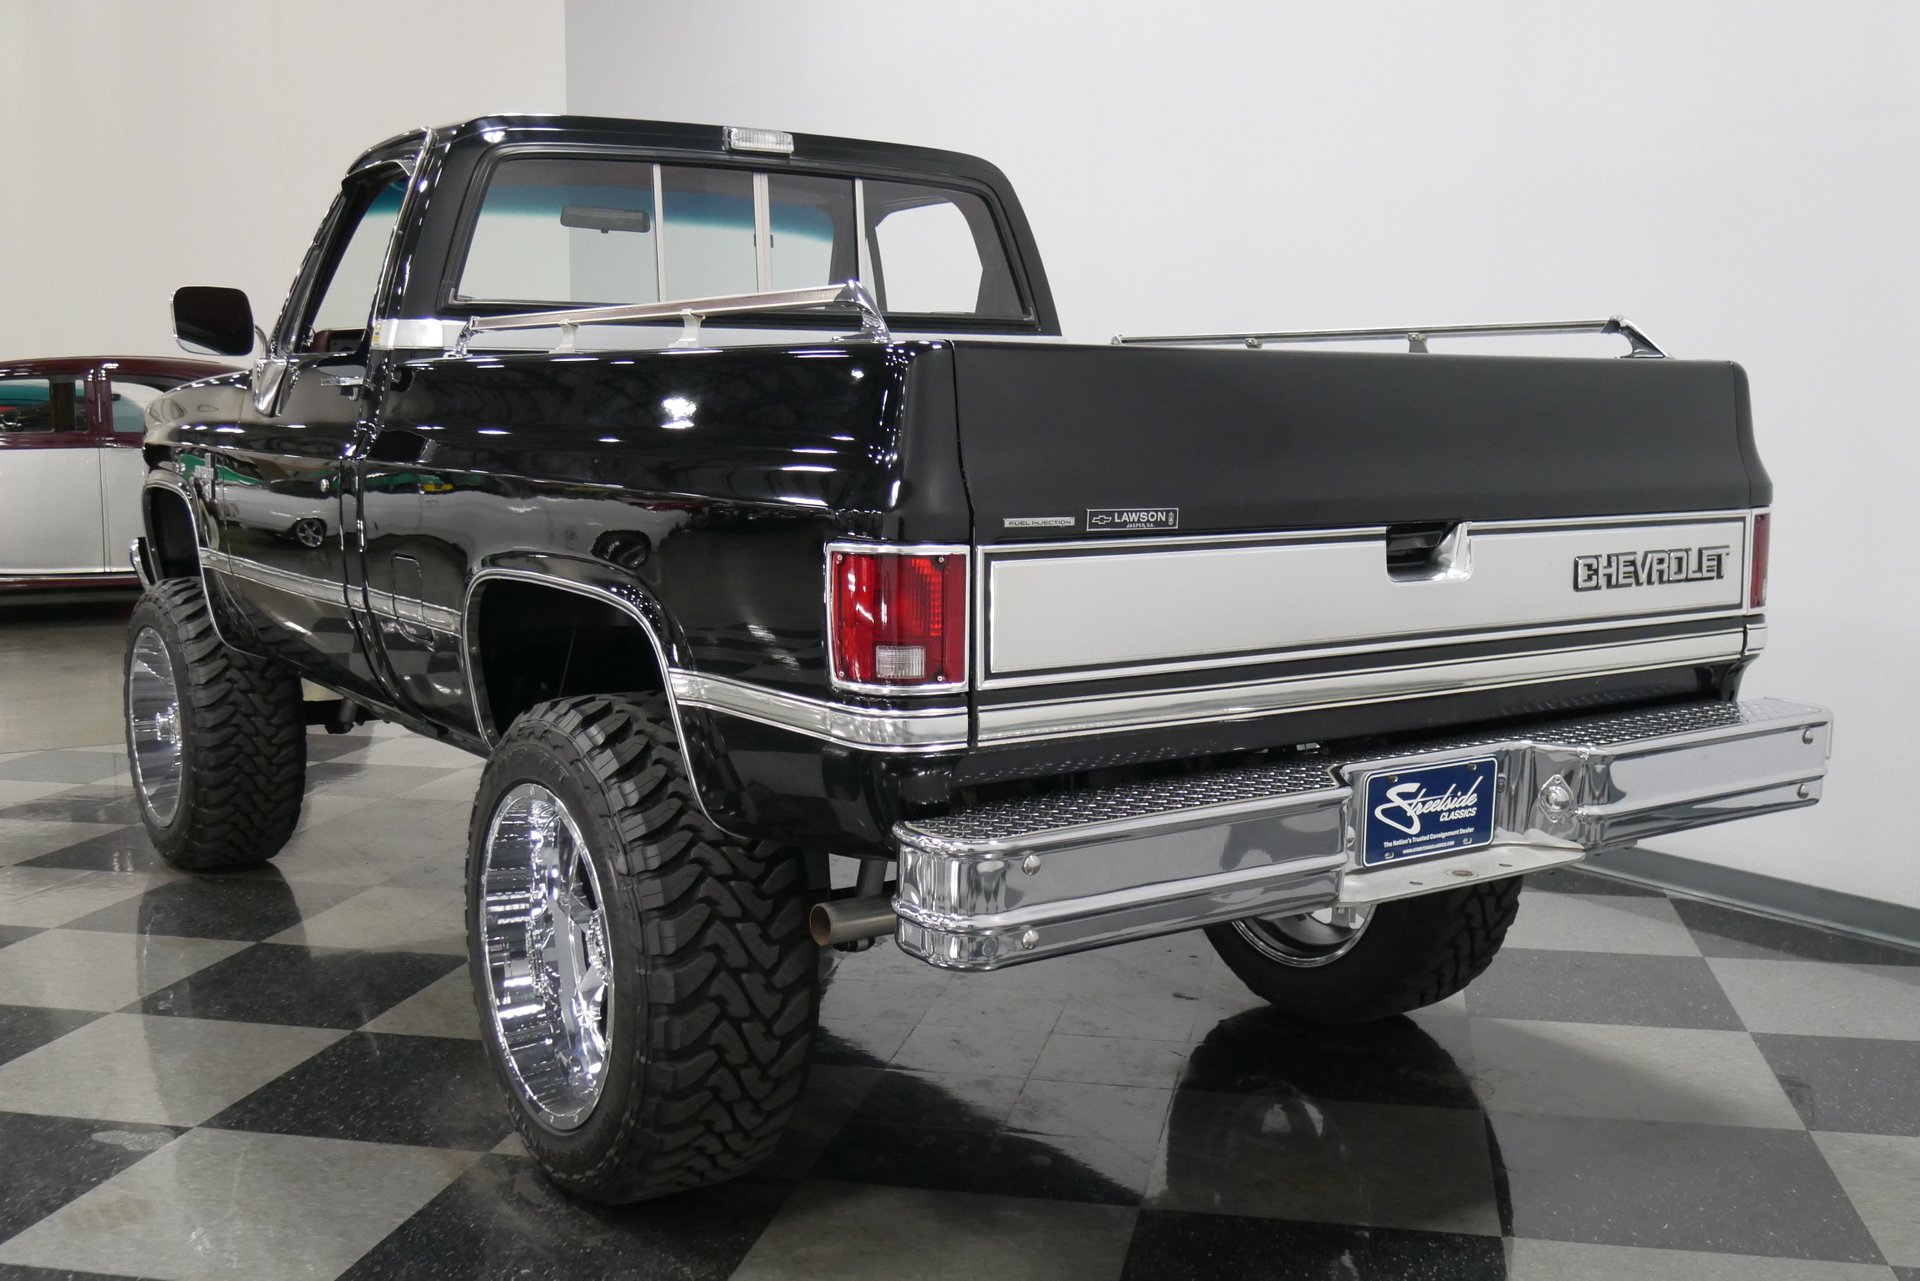 1987 Chevrolet K10 Silverado For Sale Is Square And Shiny